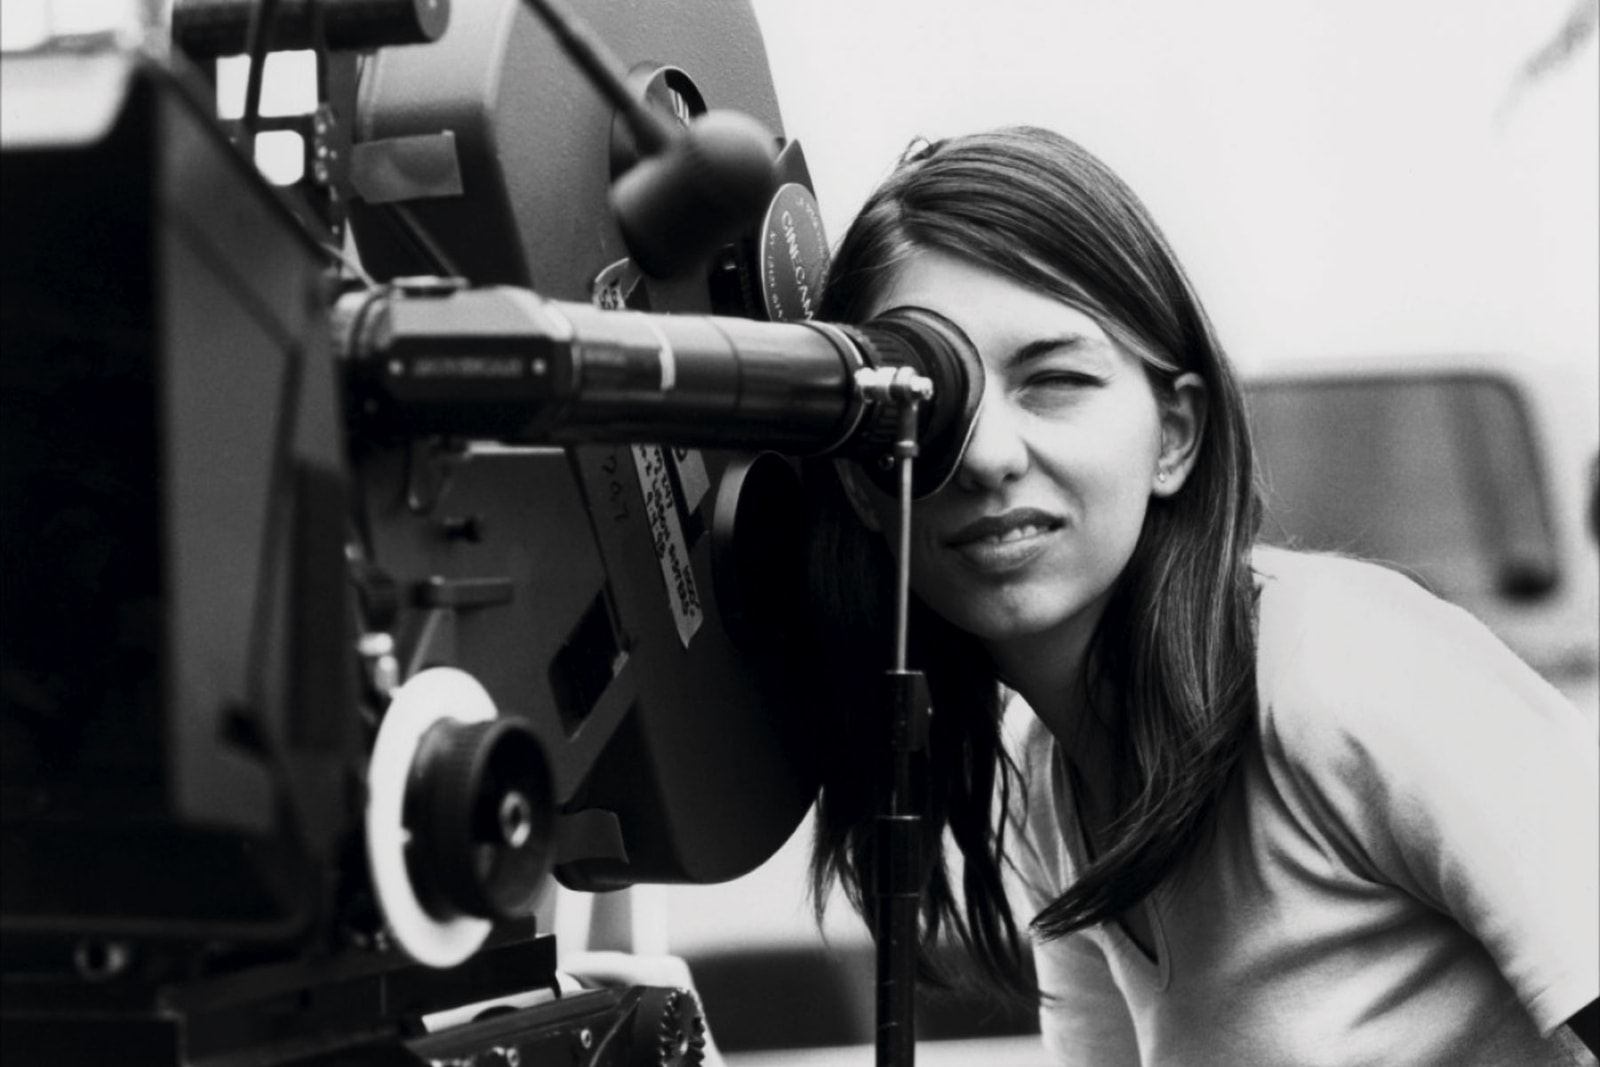 20 Films to Watch out for in 2020 movies videos trailers tenet blockbusters a24 netflix apple TV + plus indie under the radar wes anderson sofia coppola guillermo del toro steven speilberg 